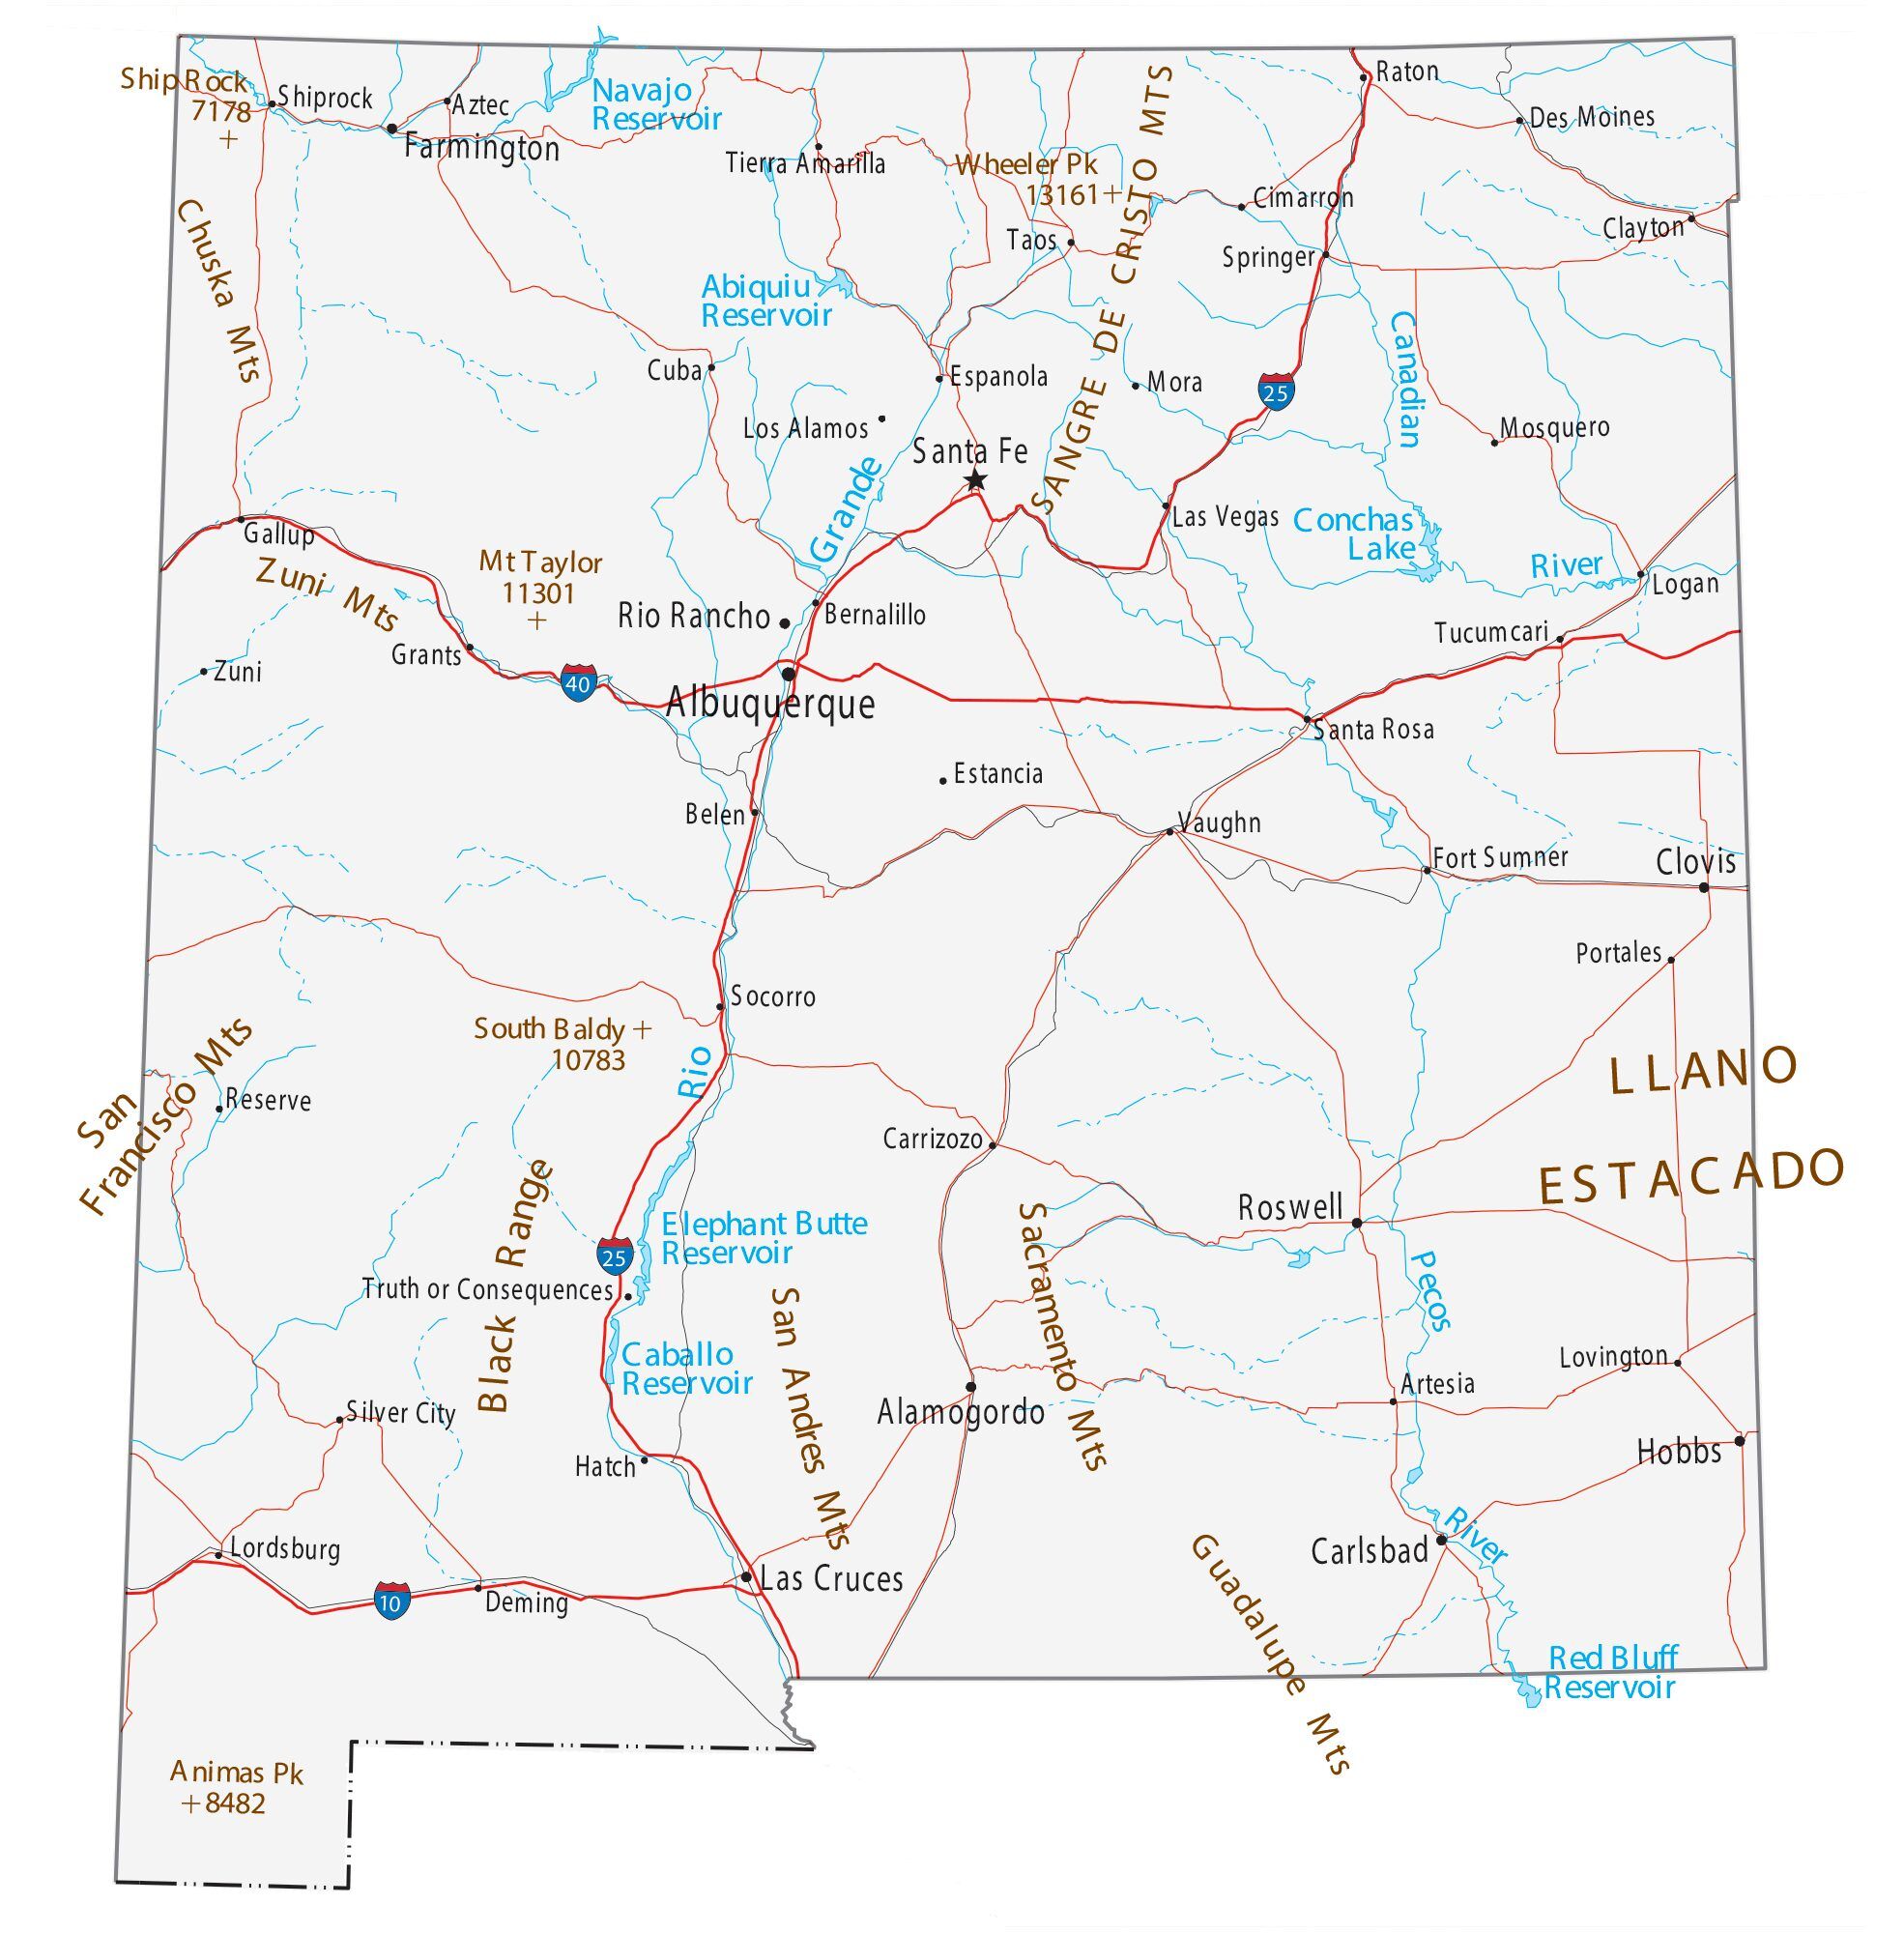 New Mexico Map - Cities and Roads - GIS Geography